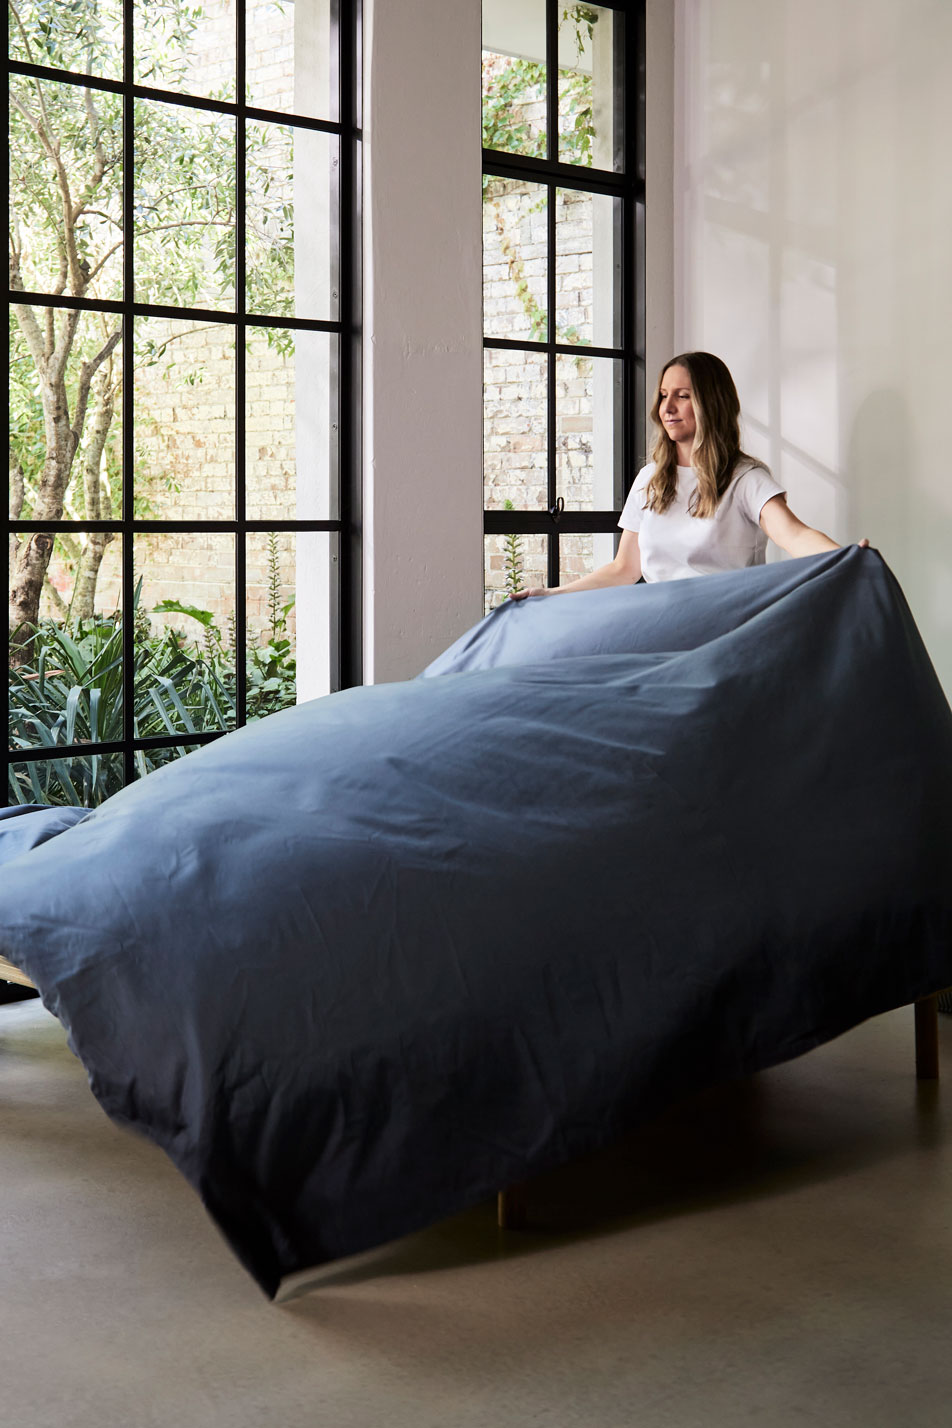 A young woman styling a bed with navy blue cotton sateen sheets. In the background are tall French windows with trees outside.